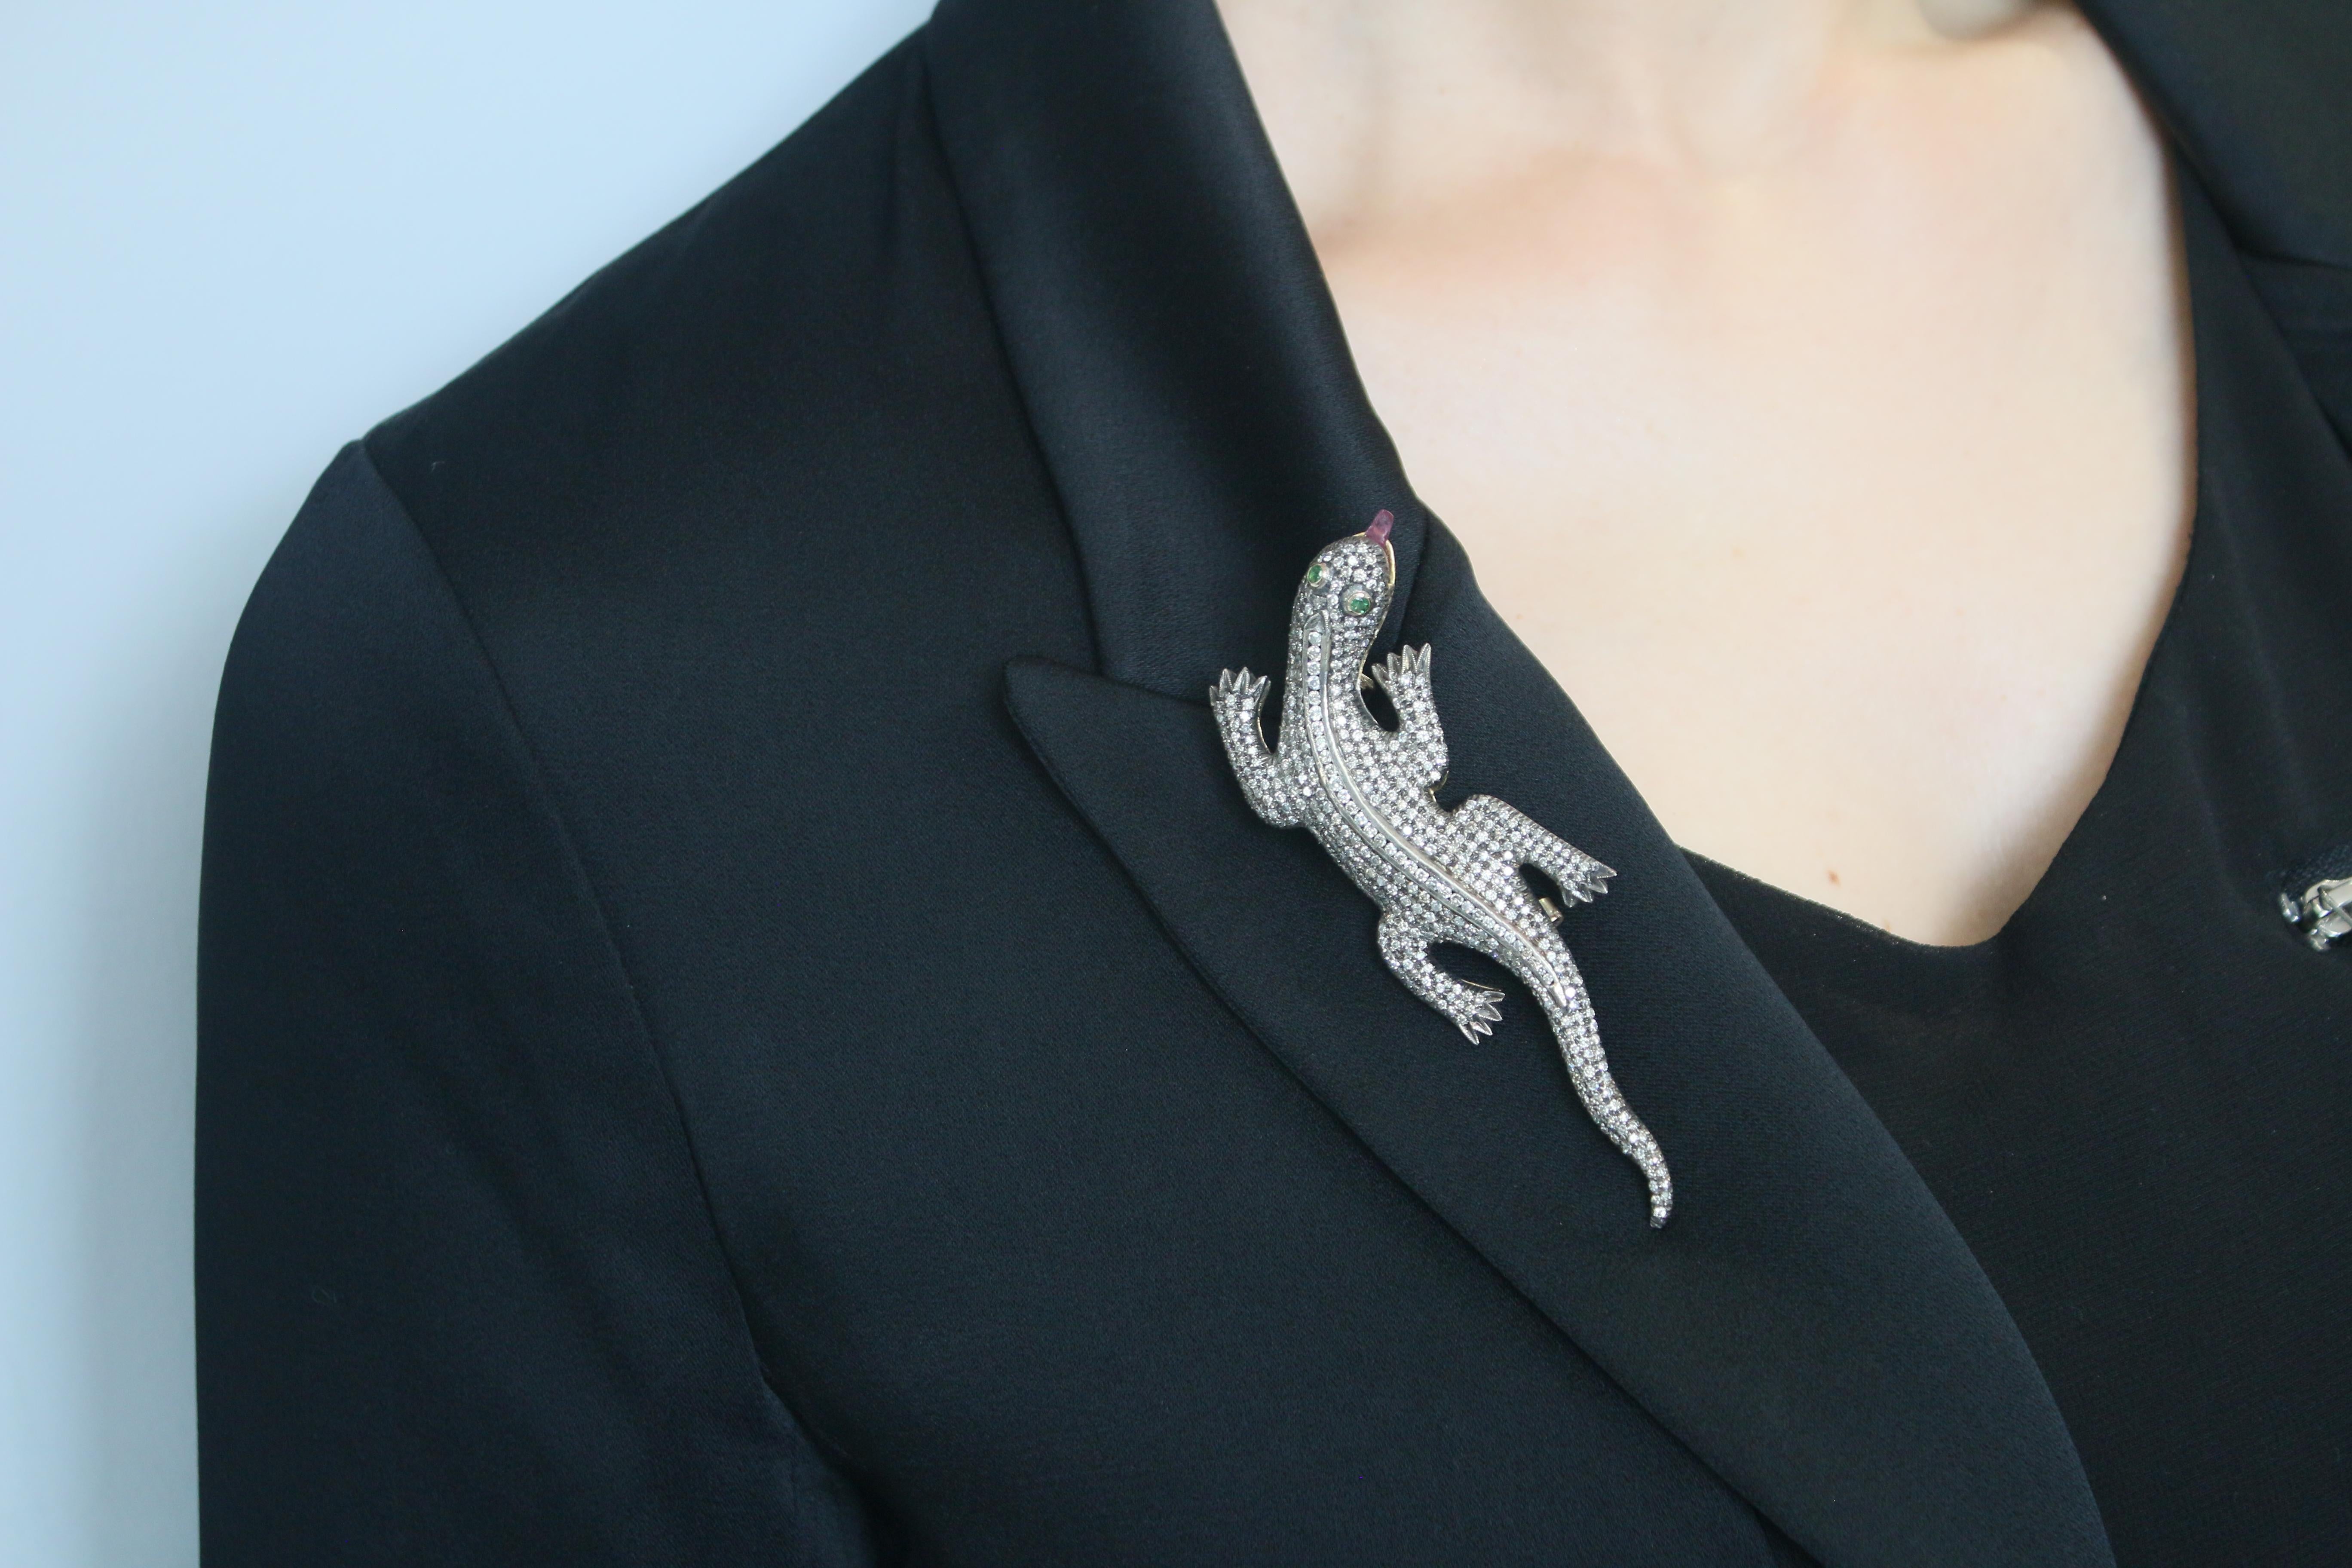 Introducing our exquisite Lizard Pin, a captivating and meticulously crafted piece that embodies the perfect blend of elegance and whimsy. This charming lizard pin is adorned with stunning diamonds and crafted in 18K gold, making it a unique and